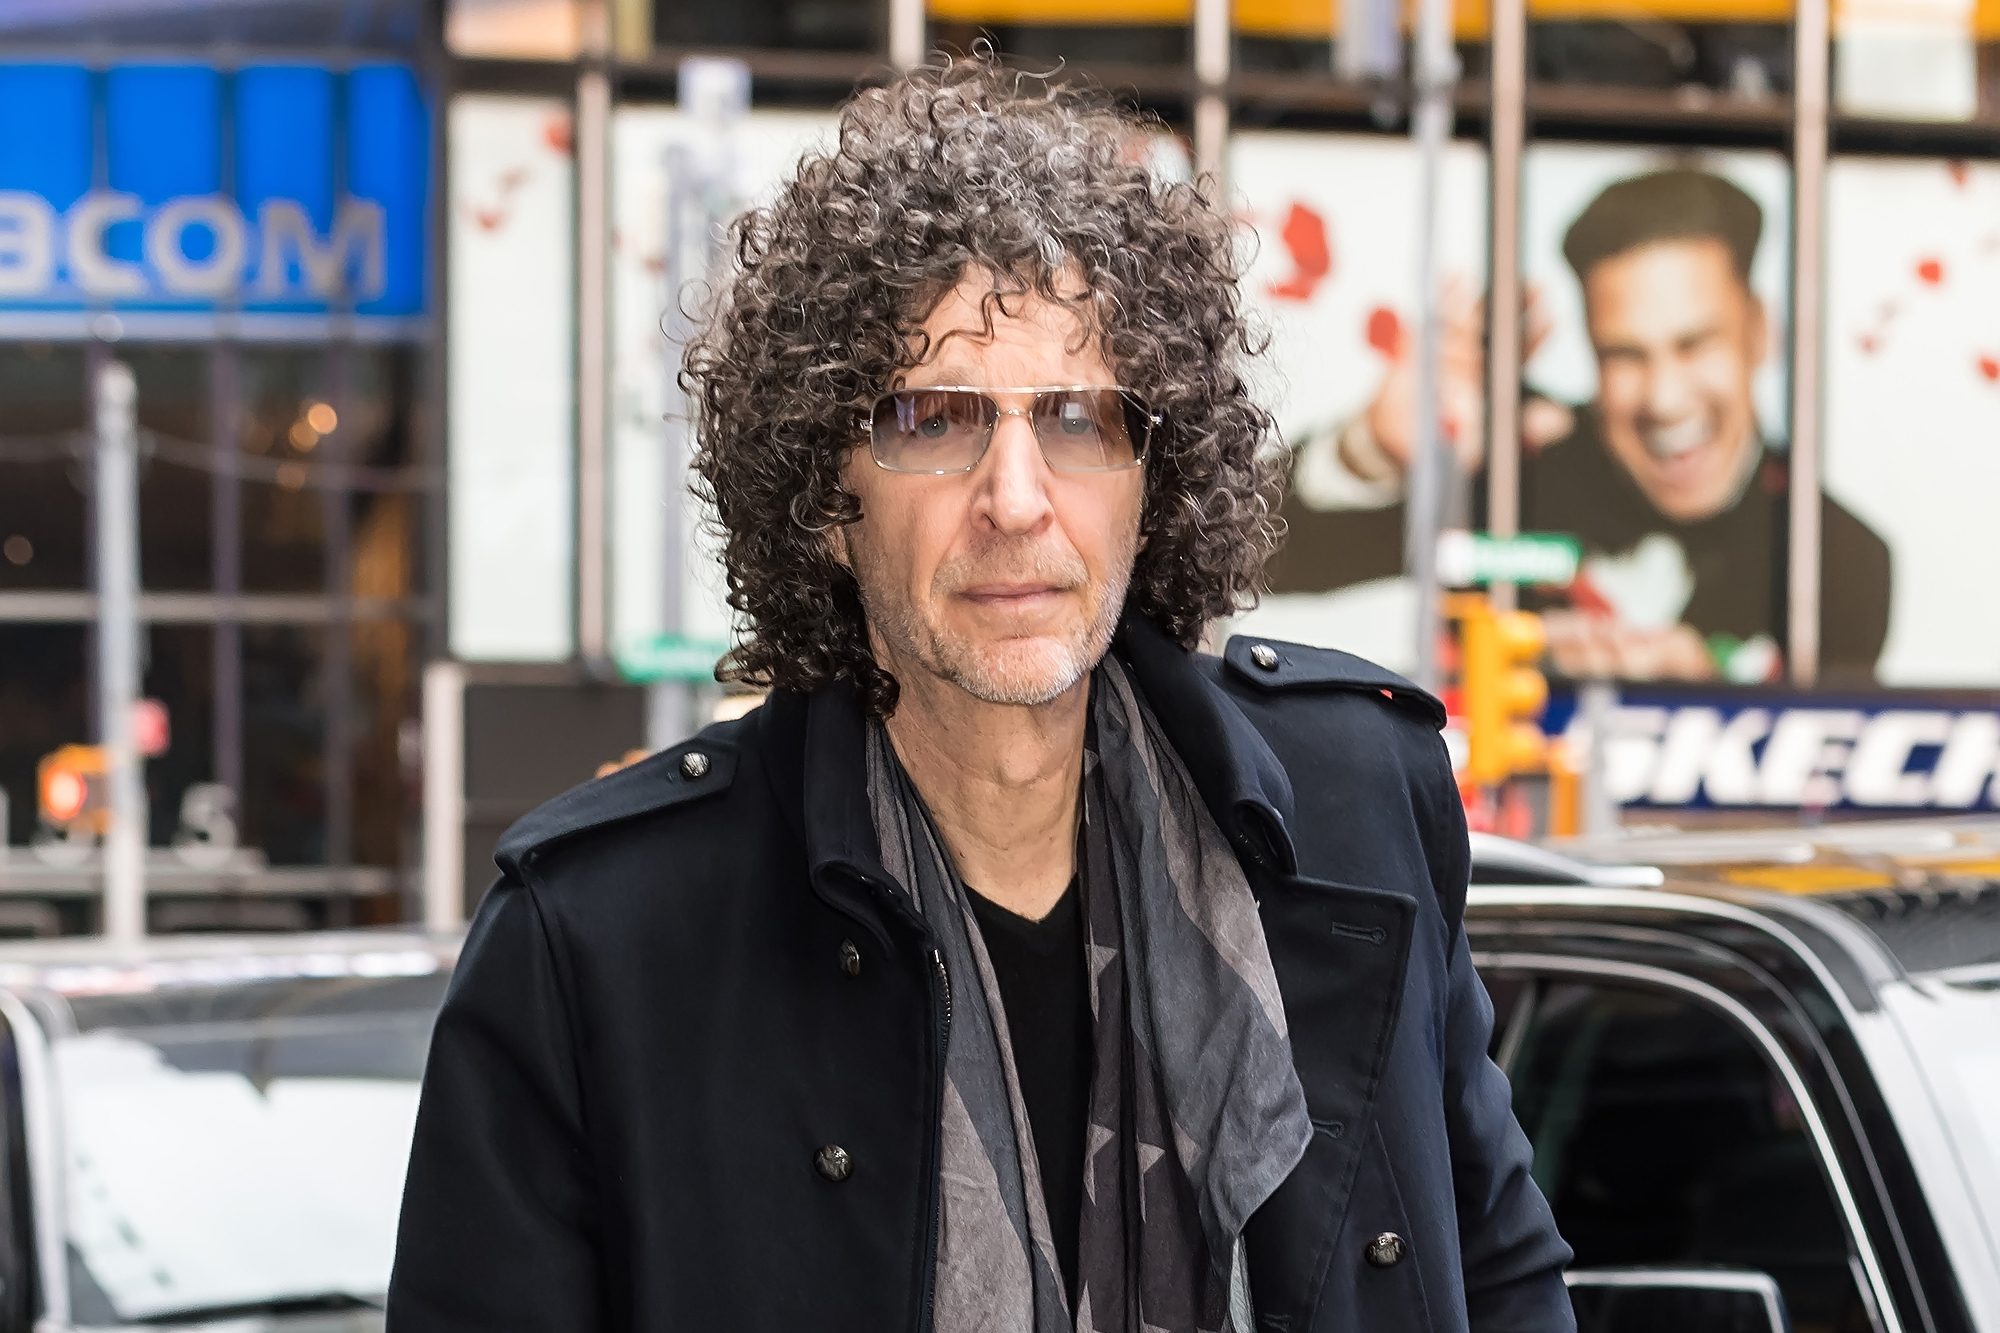 cynthia hairston recommends howard stern dropping loads pic